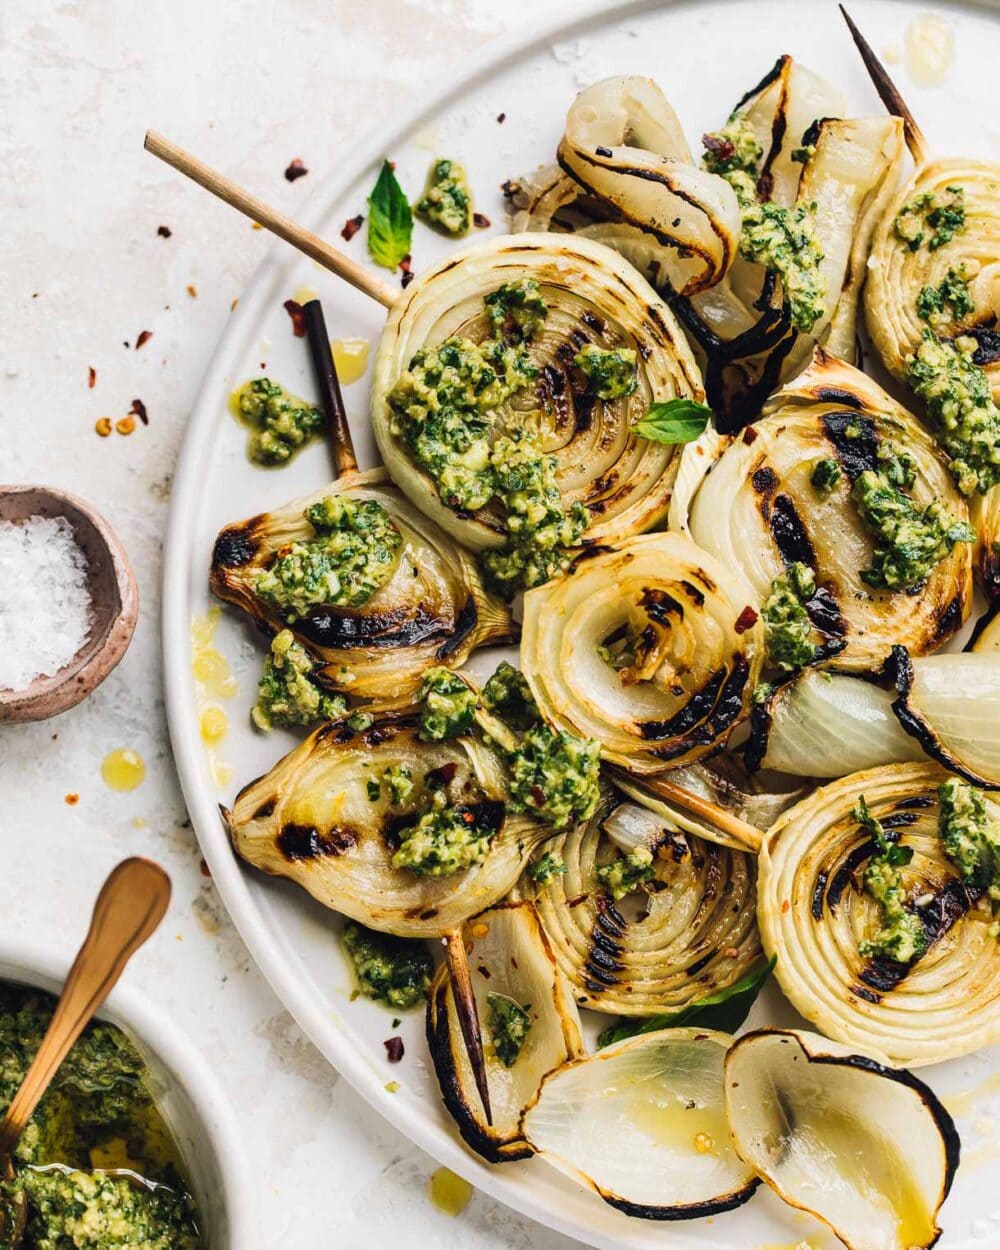 white plate holding grilled onions on skewers with pesto